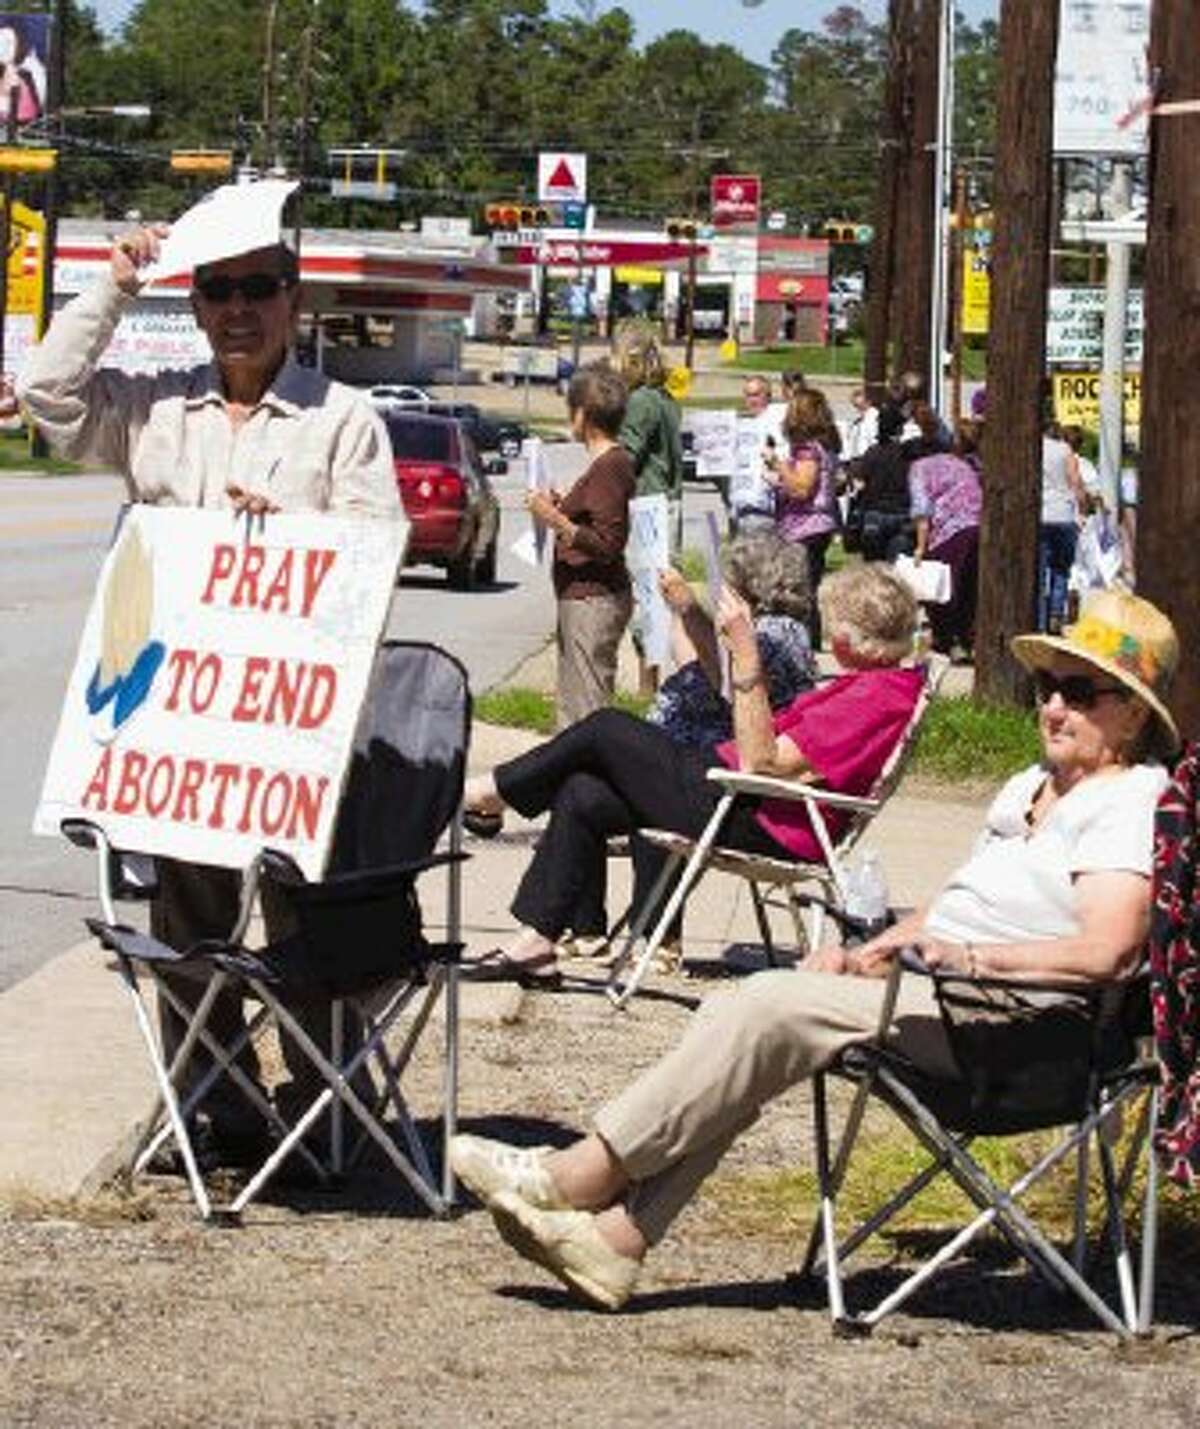 Pro-life supporters hold up signs during the Life Chain, a pro-life movement, Sunday afternoon. People lined Frazier Street in Conroe holding up pro-life signs. Go to HCNPics.com to view and purchase this photo, and others like it.